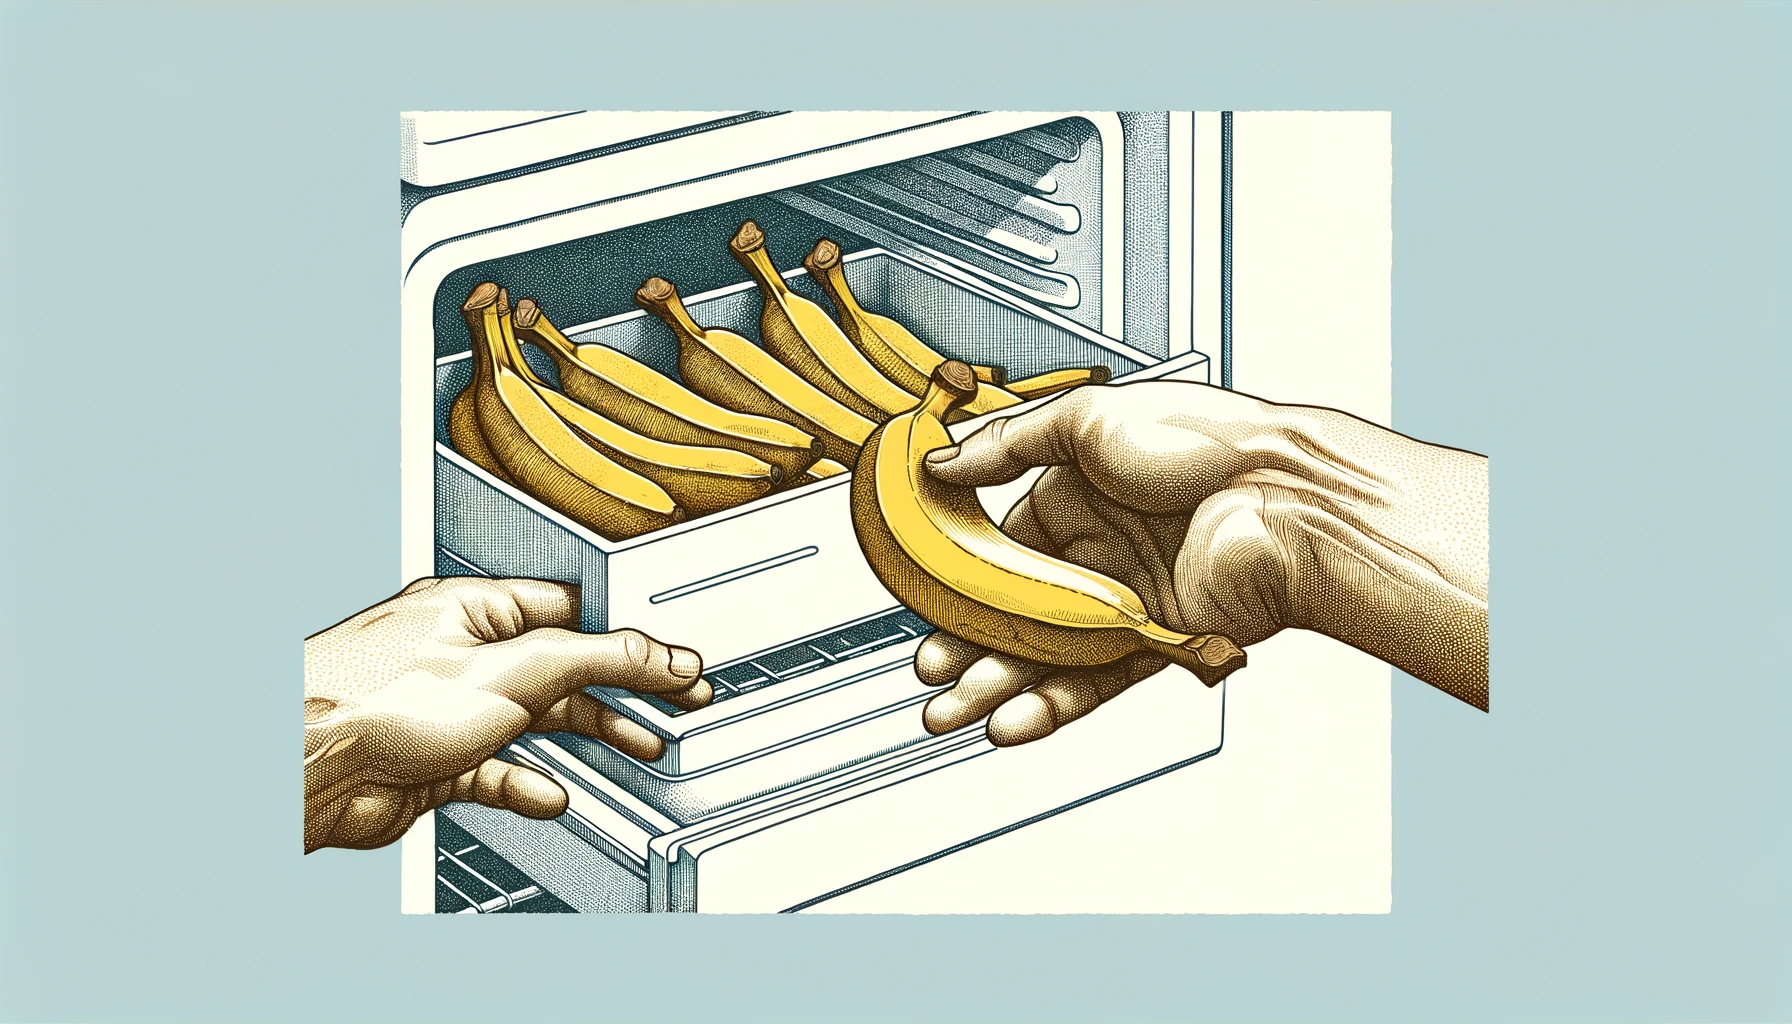 Tasty-Looking Bananas Being Placed Into A Freezer By Human Hands Set On A Light Blue Background